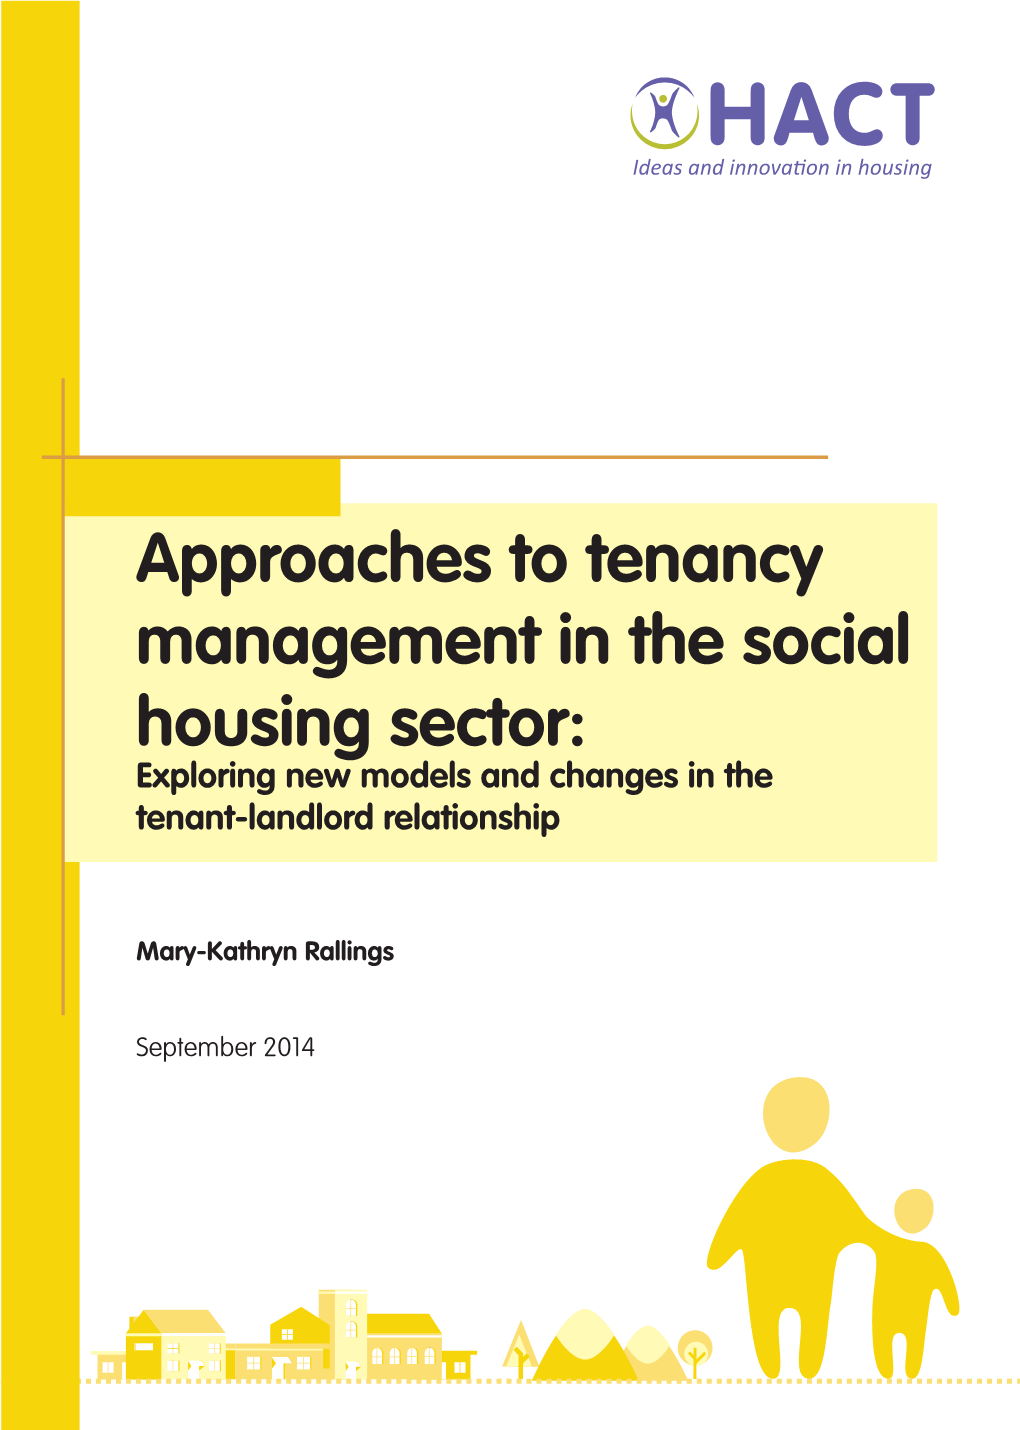 Approaches to Tenancy Management in the Social Housing Sector: Exploring New Models and Changes in the Tenant-Landlord Relationship